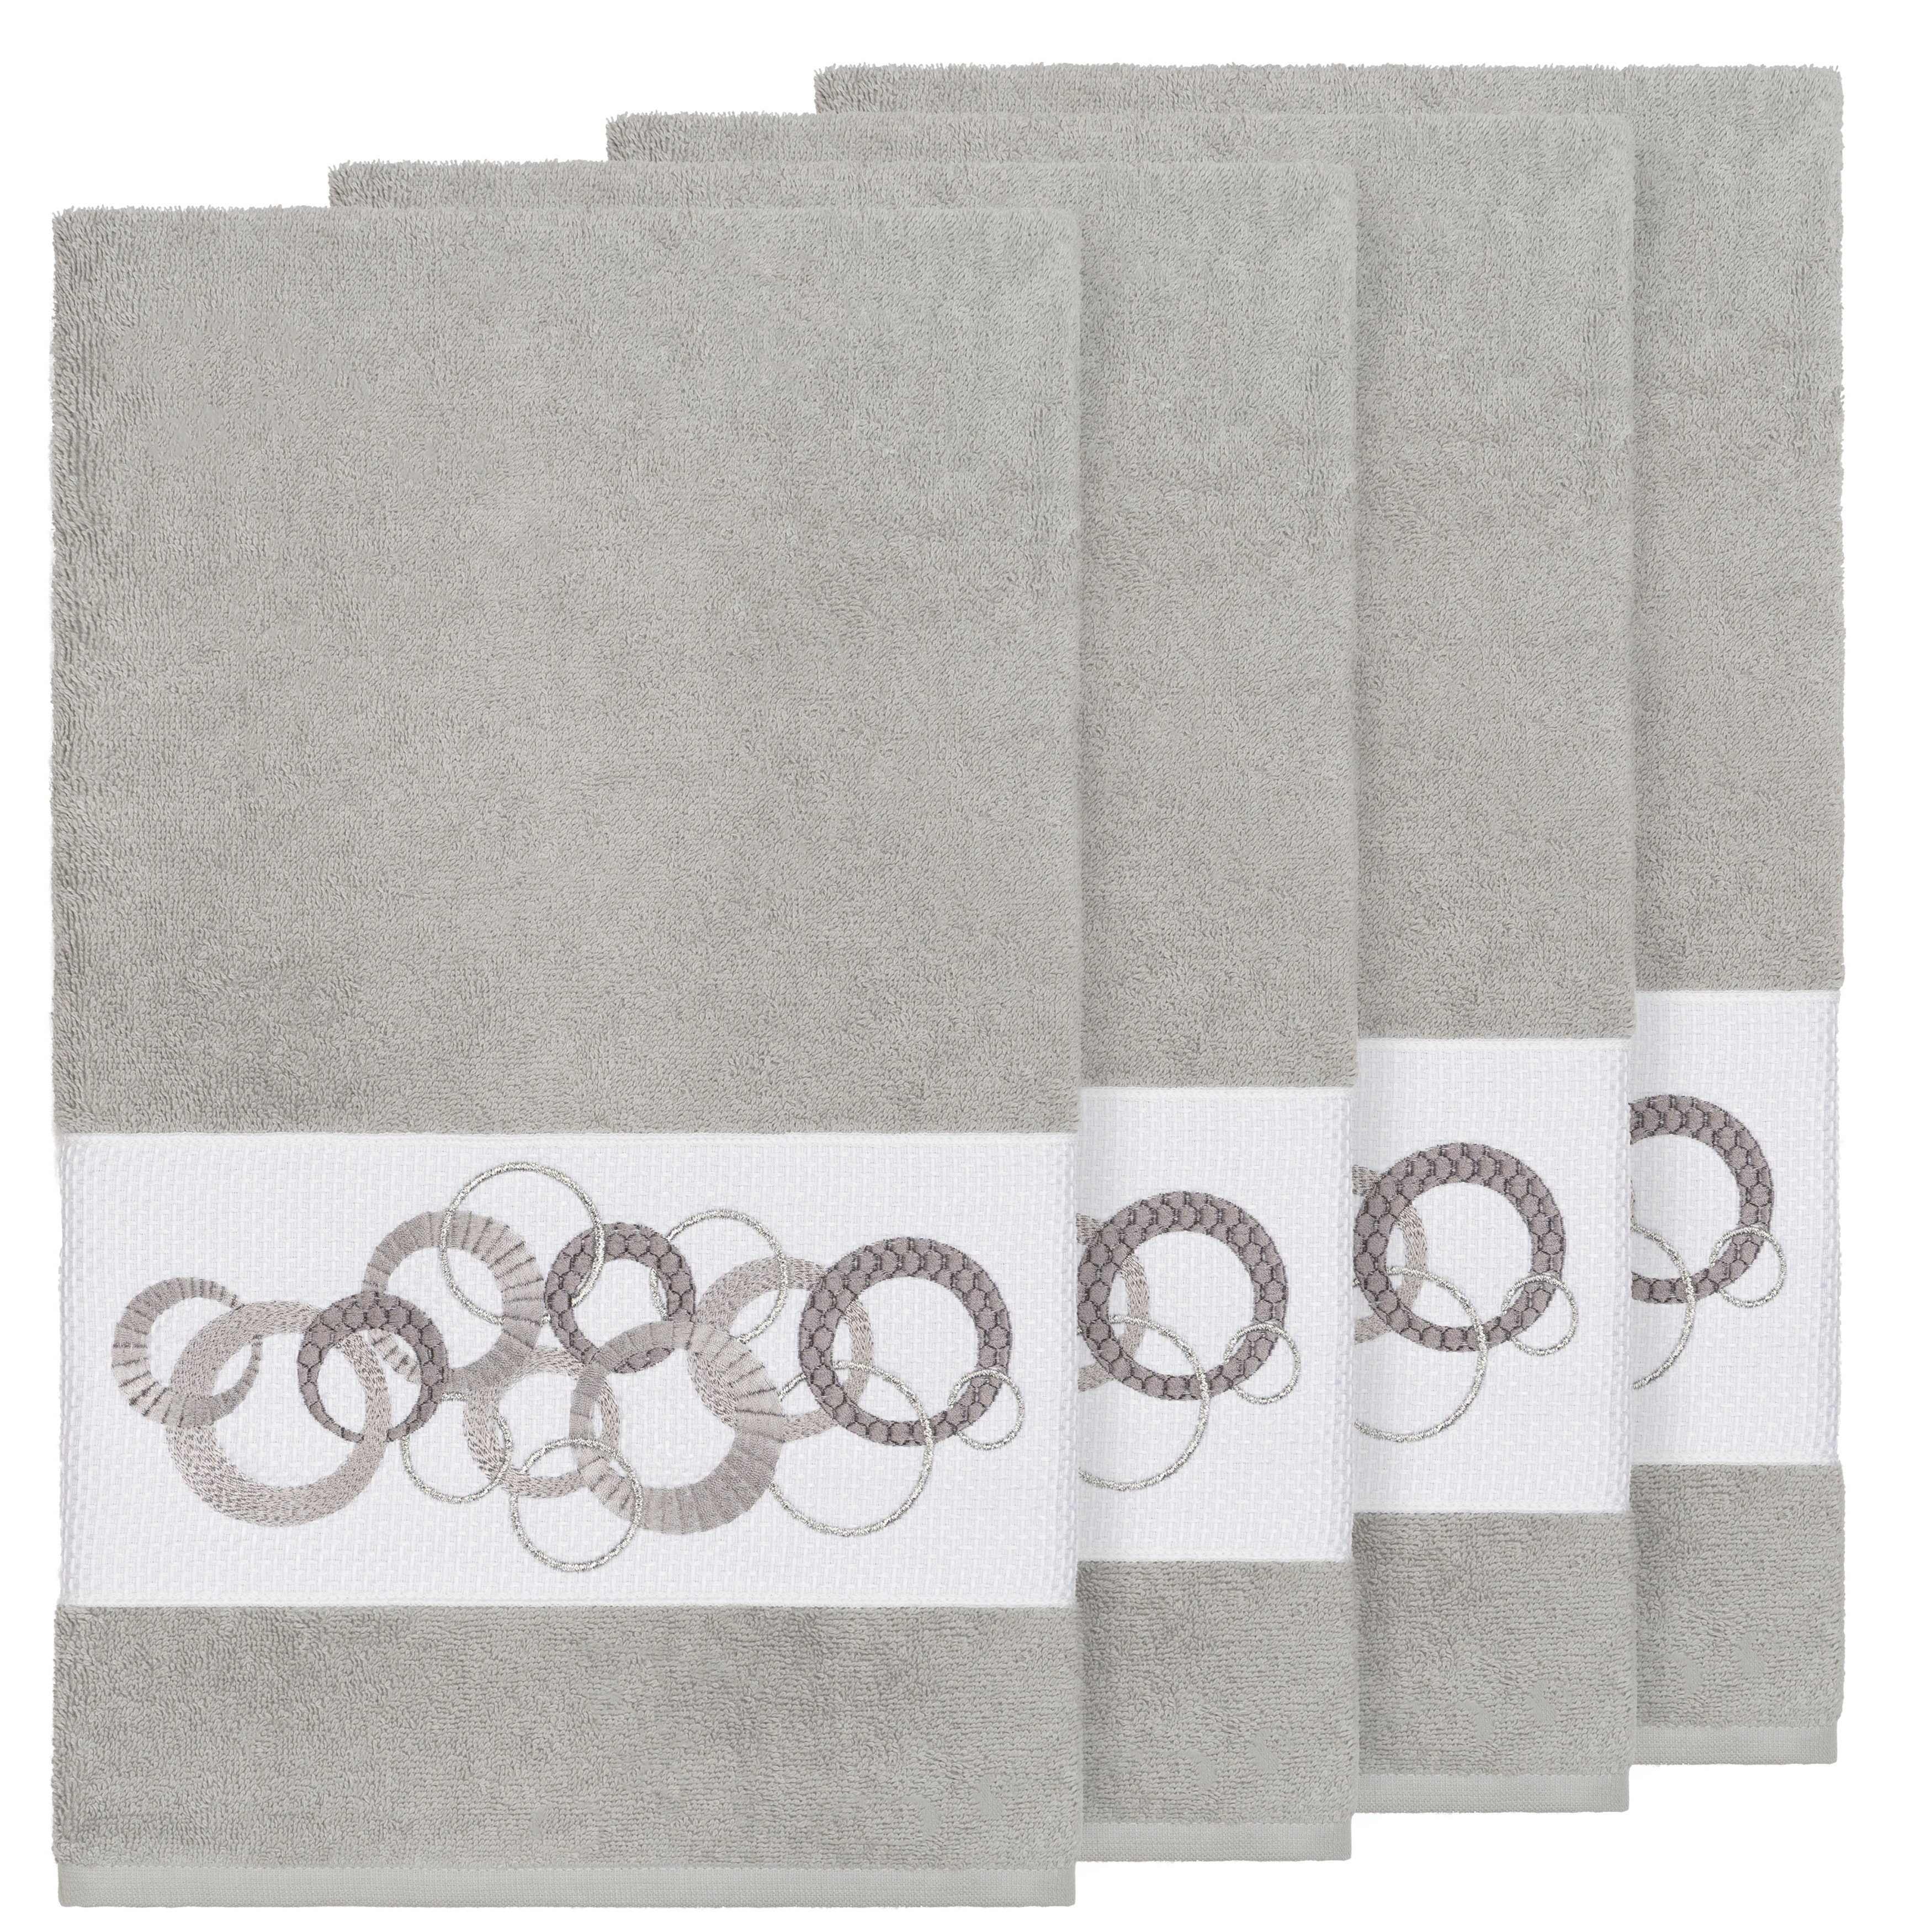 https://ak1.ostkcdn.com/images/products/22160807/Authentic-Hotel-and-Spa-Turkish-Cotton-Circles-Embroidered-Light-Grey-4-piece-Bath-Towel-Set-558def5b-5862-4267-8332-ee3da845ee93.jpg